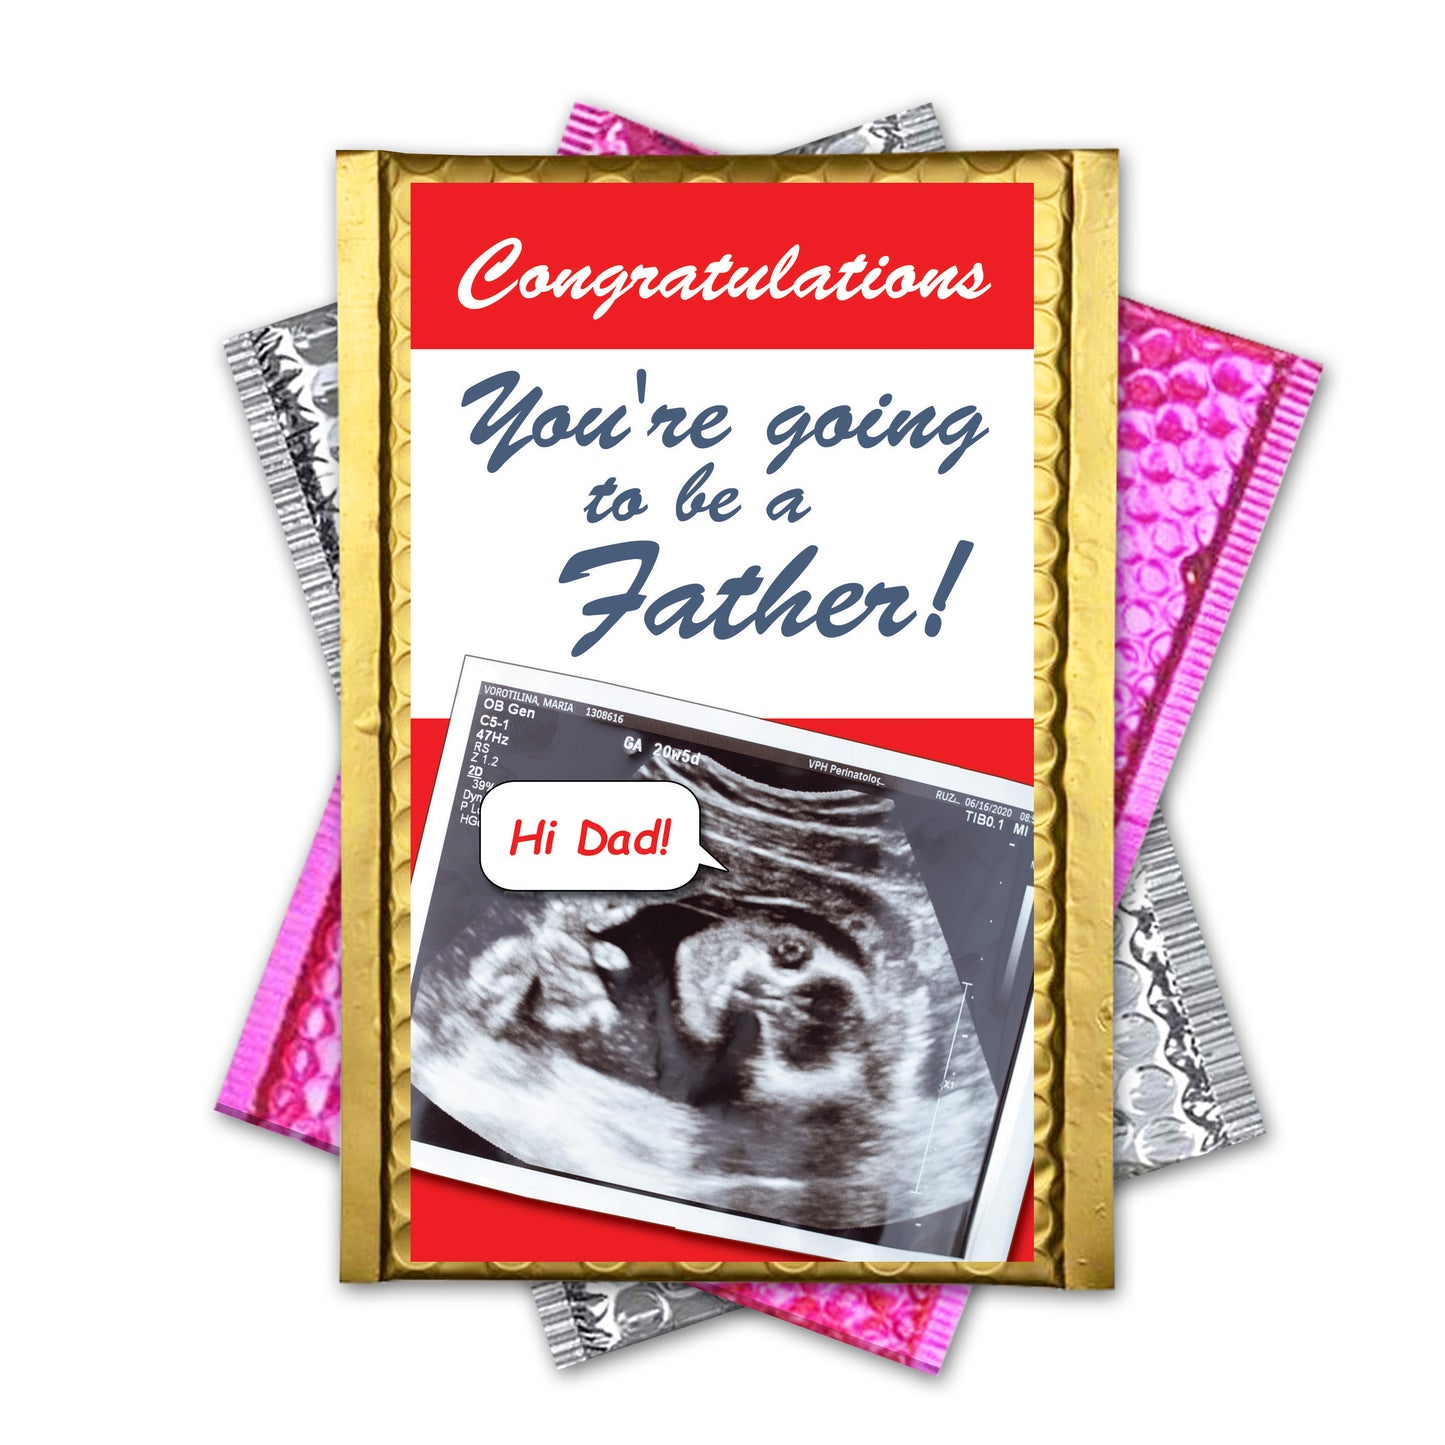 Congratulations! You're Going to be a Father! Mail Prank Father Joke